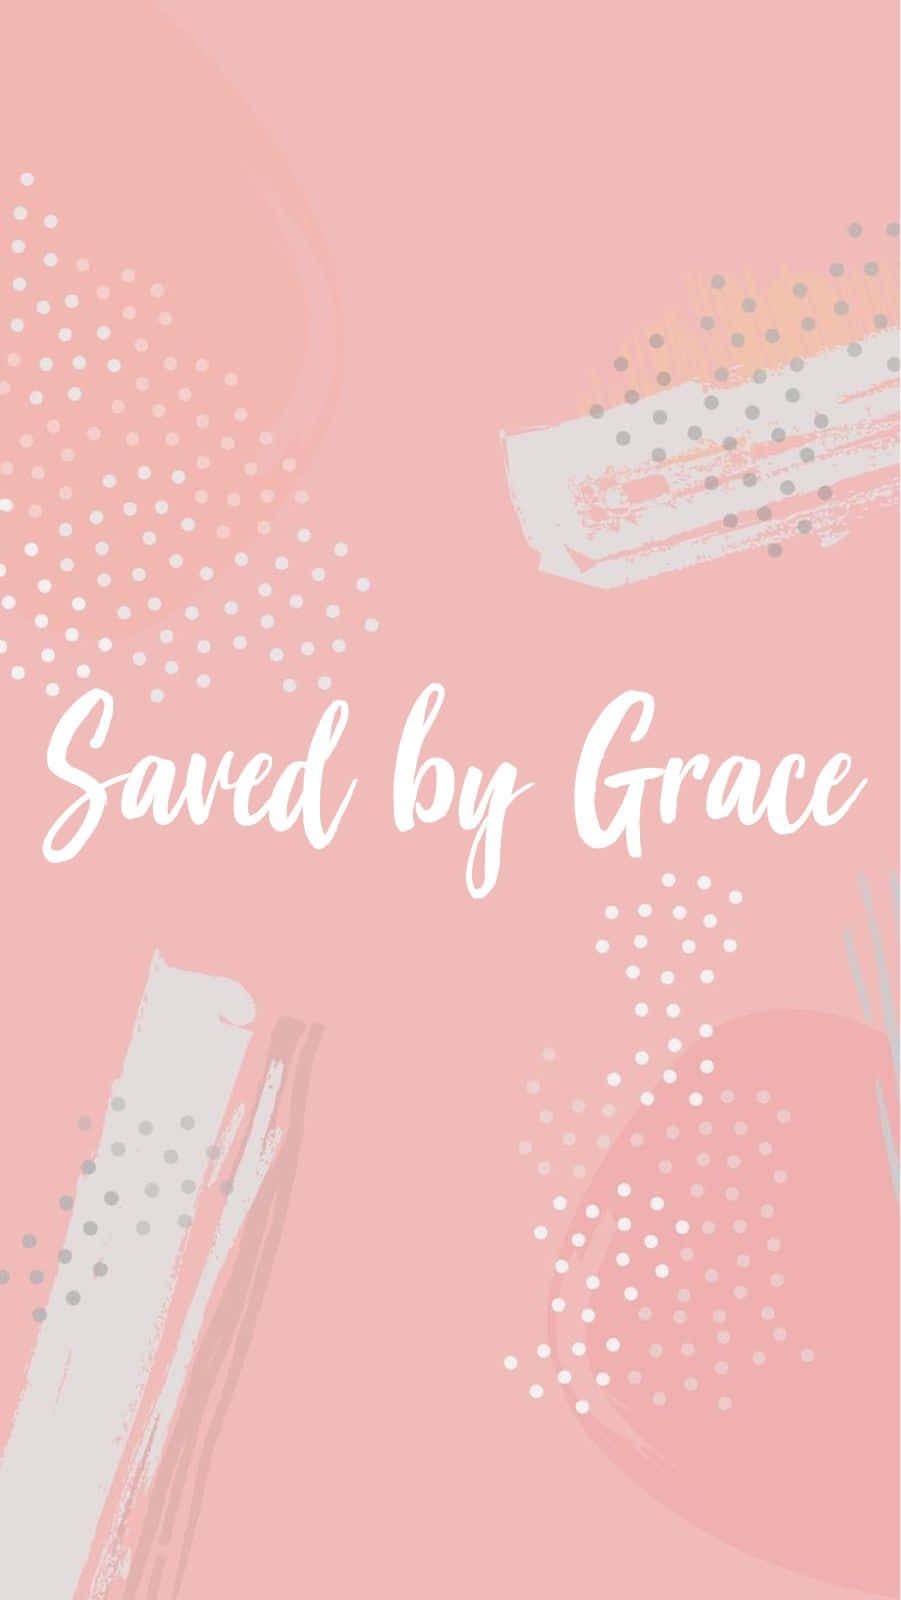 Savedby Grace Pink Background Wallpaper